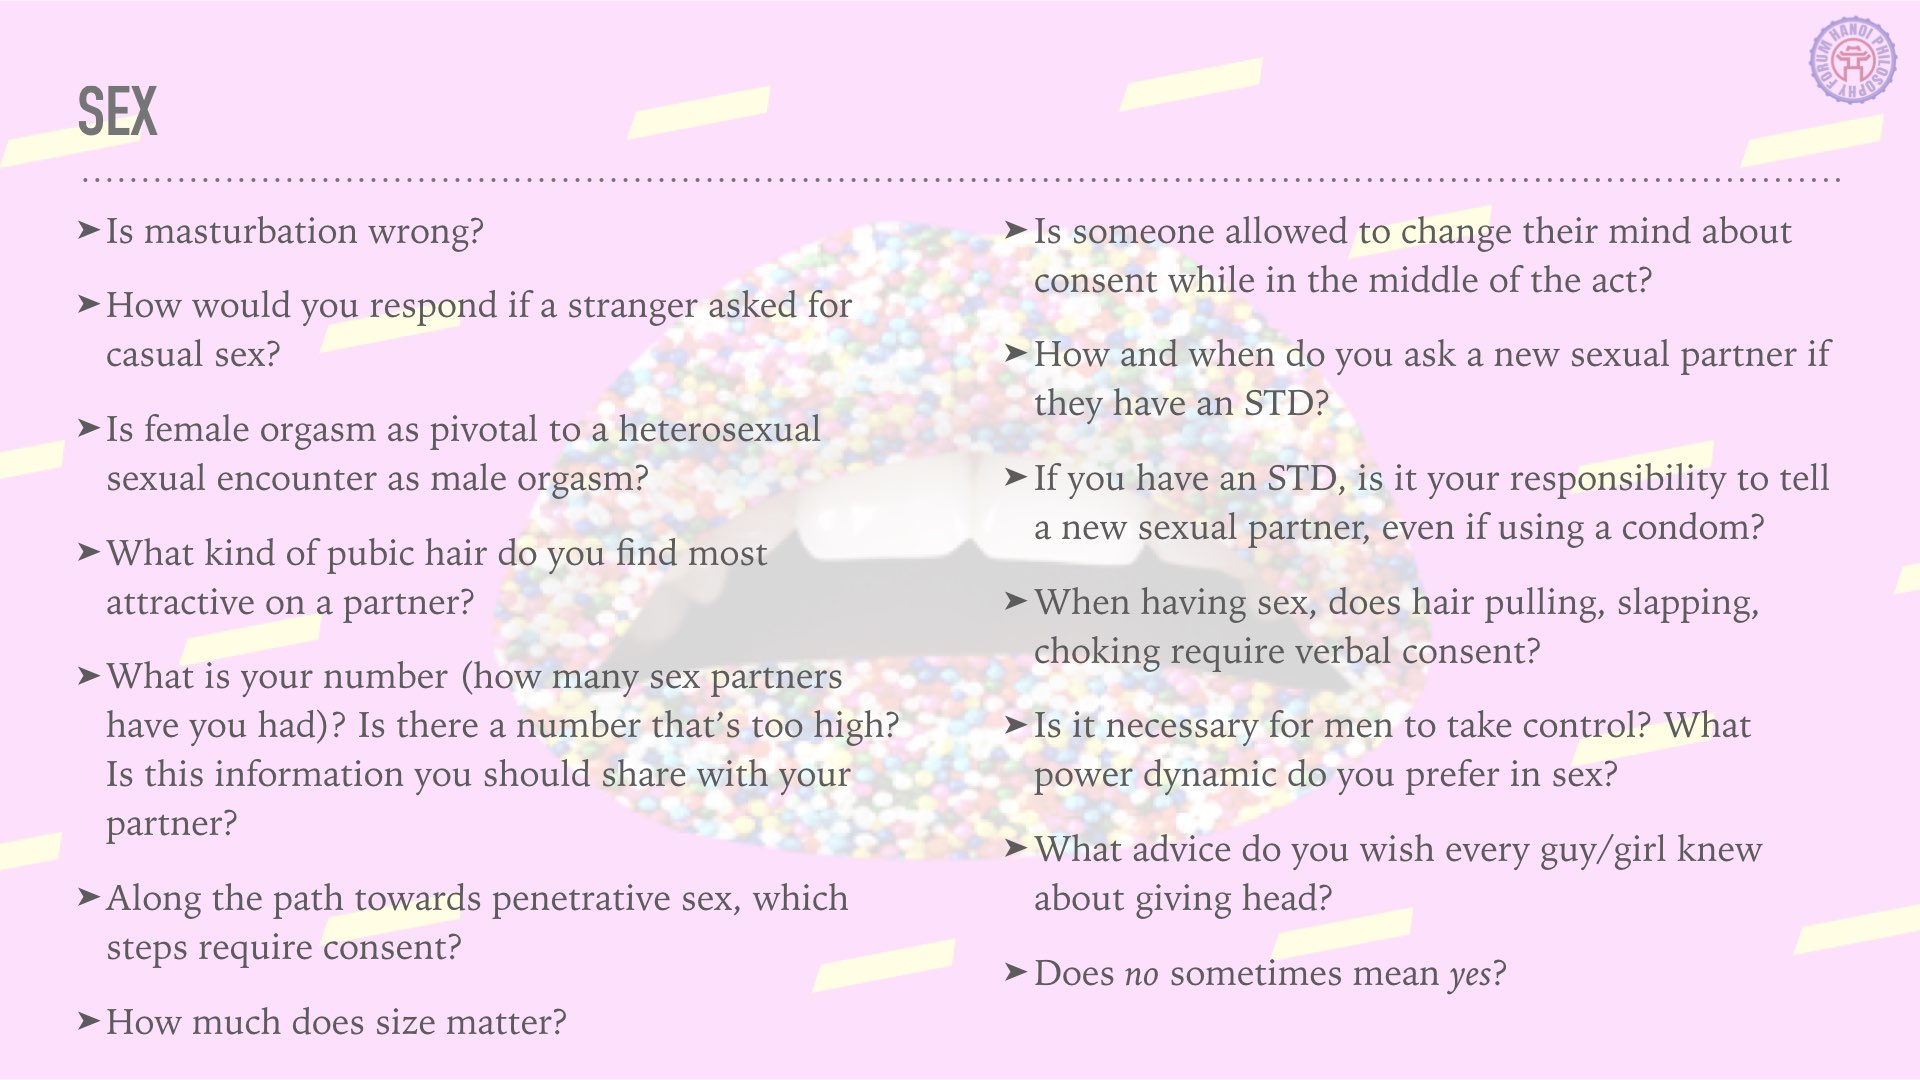 2019.06.03-04 The Rules of Dating, Sex, and Consent.036.jpeg